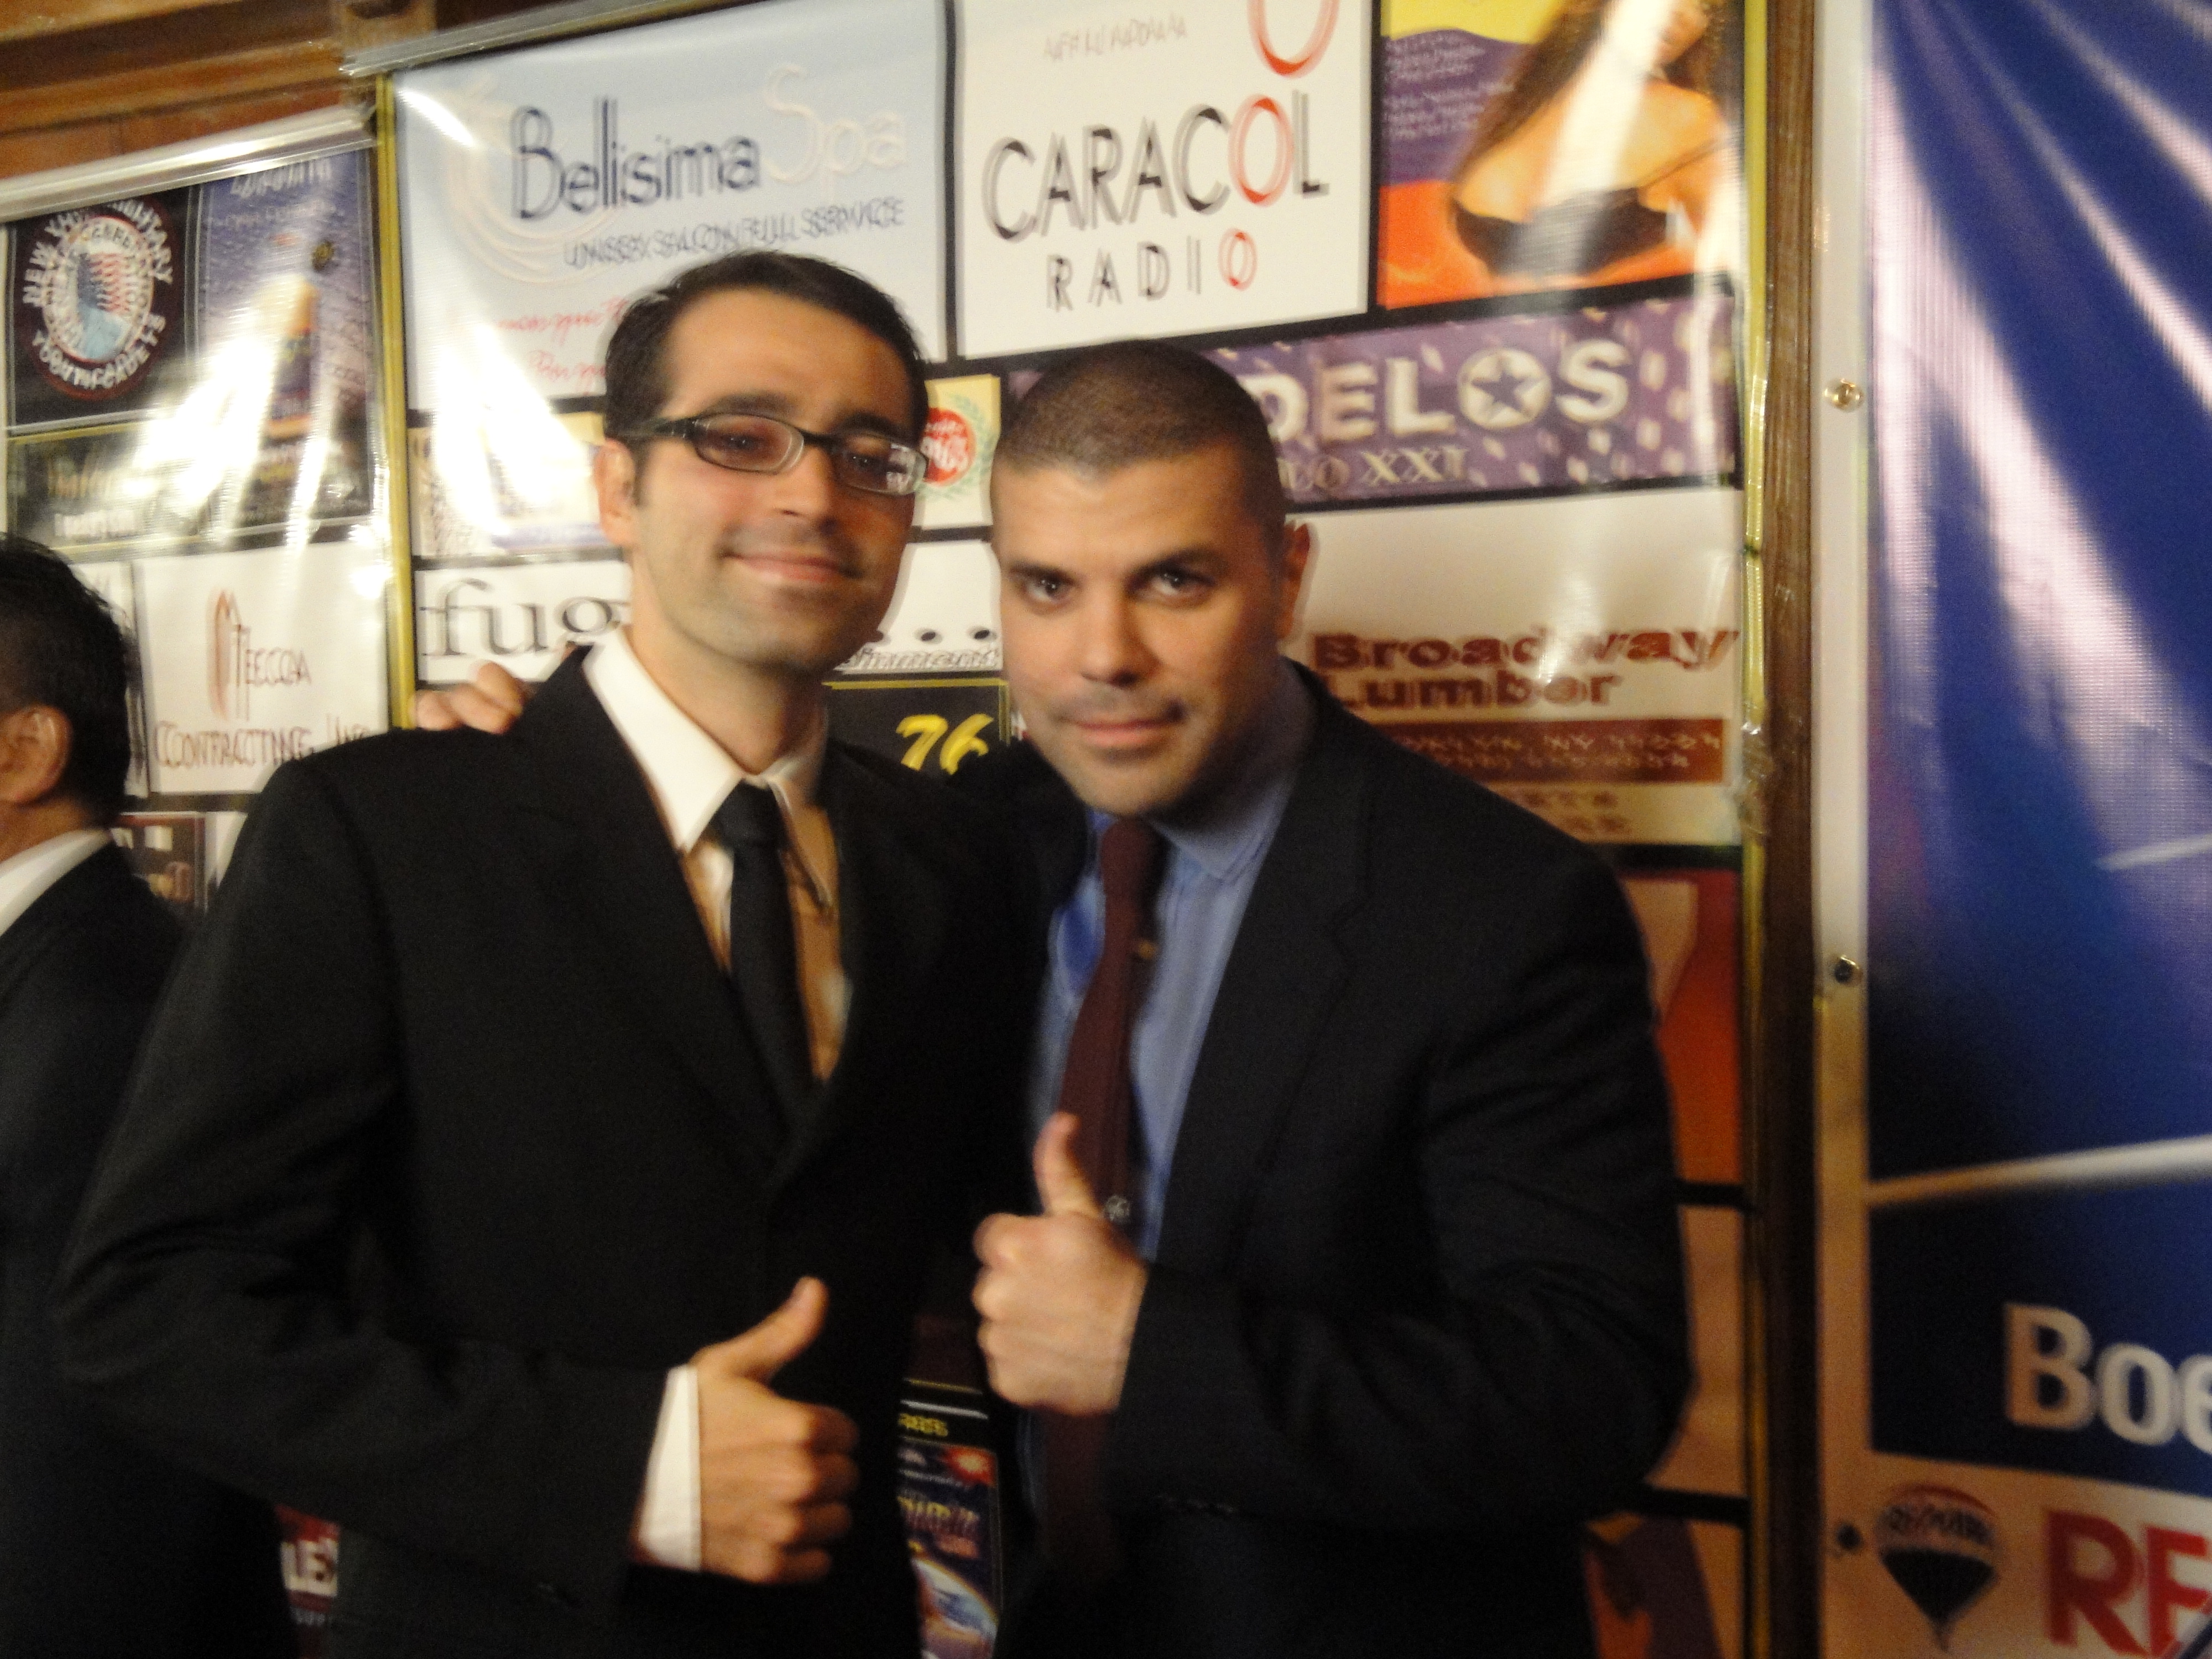 At the 3Rd annual Premios Colombia, with director Robert Fernandez.